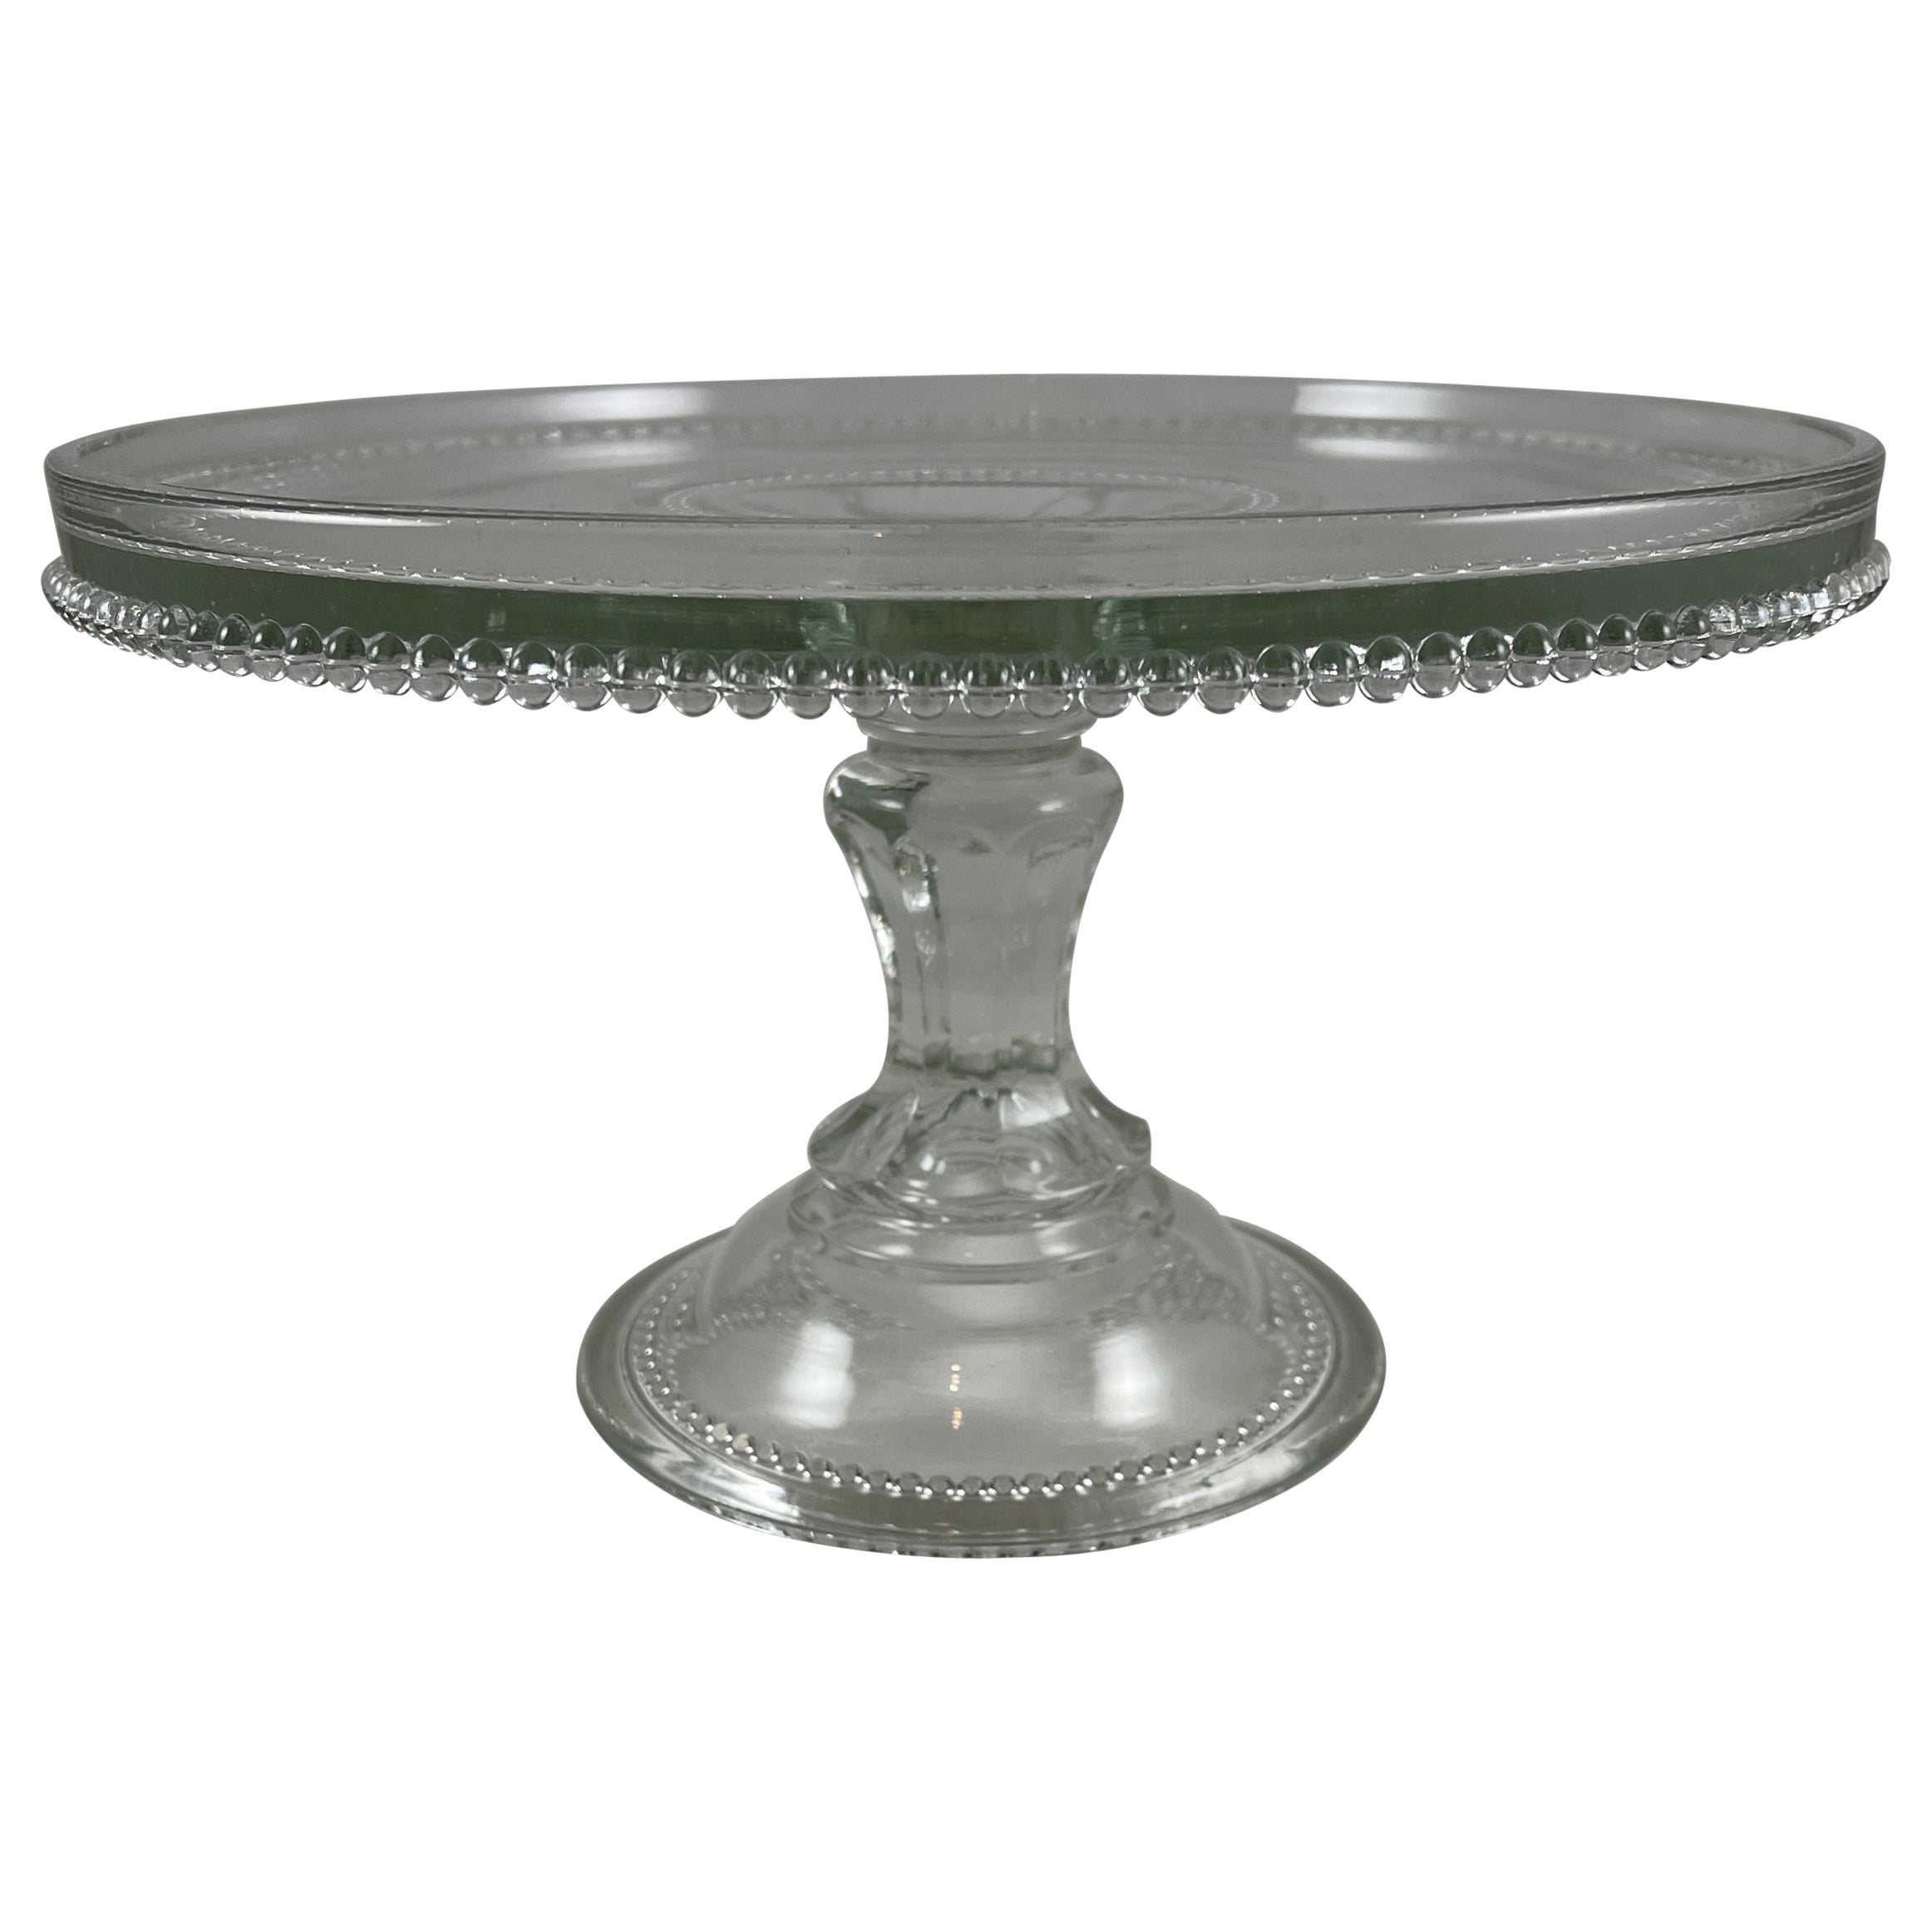 Early American Pressed Nonflint Colorless Glass Beaded Cake Stand